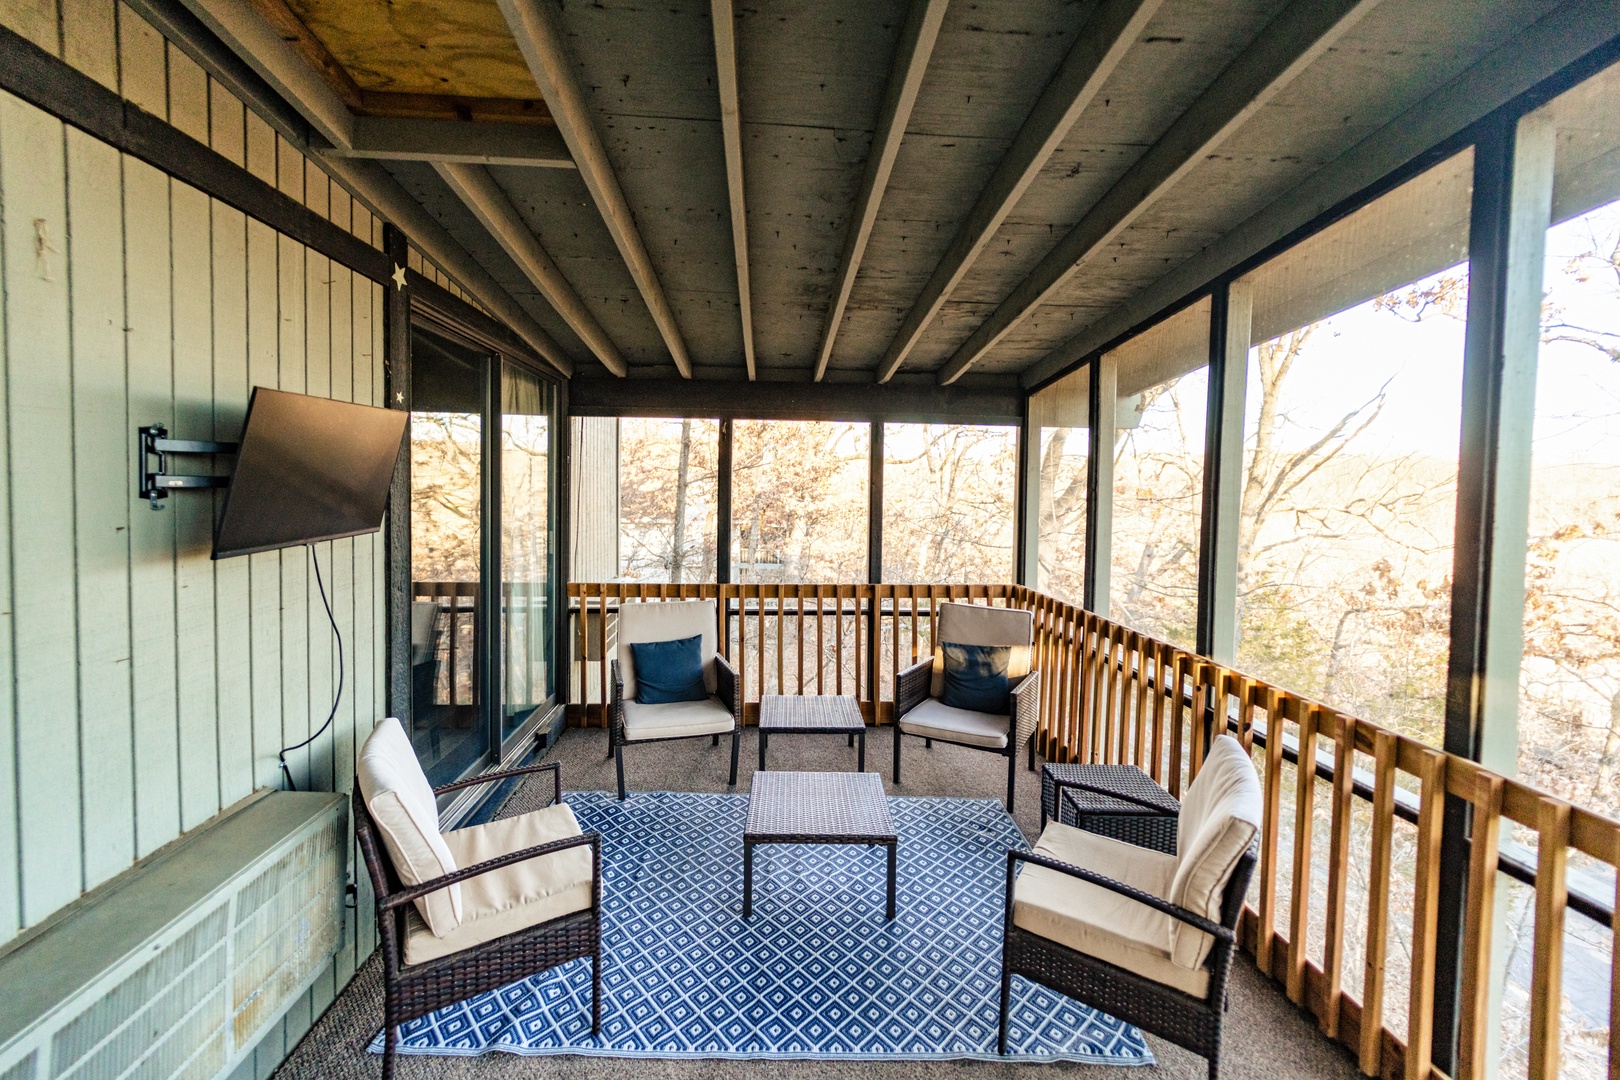 The screened porch is ideal for enjoying a movie